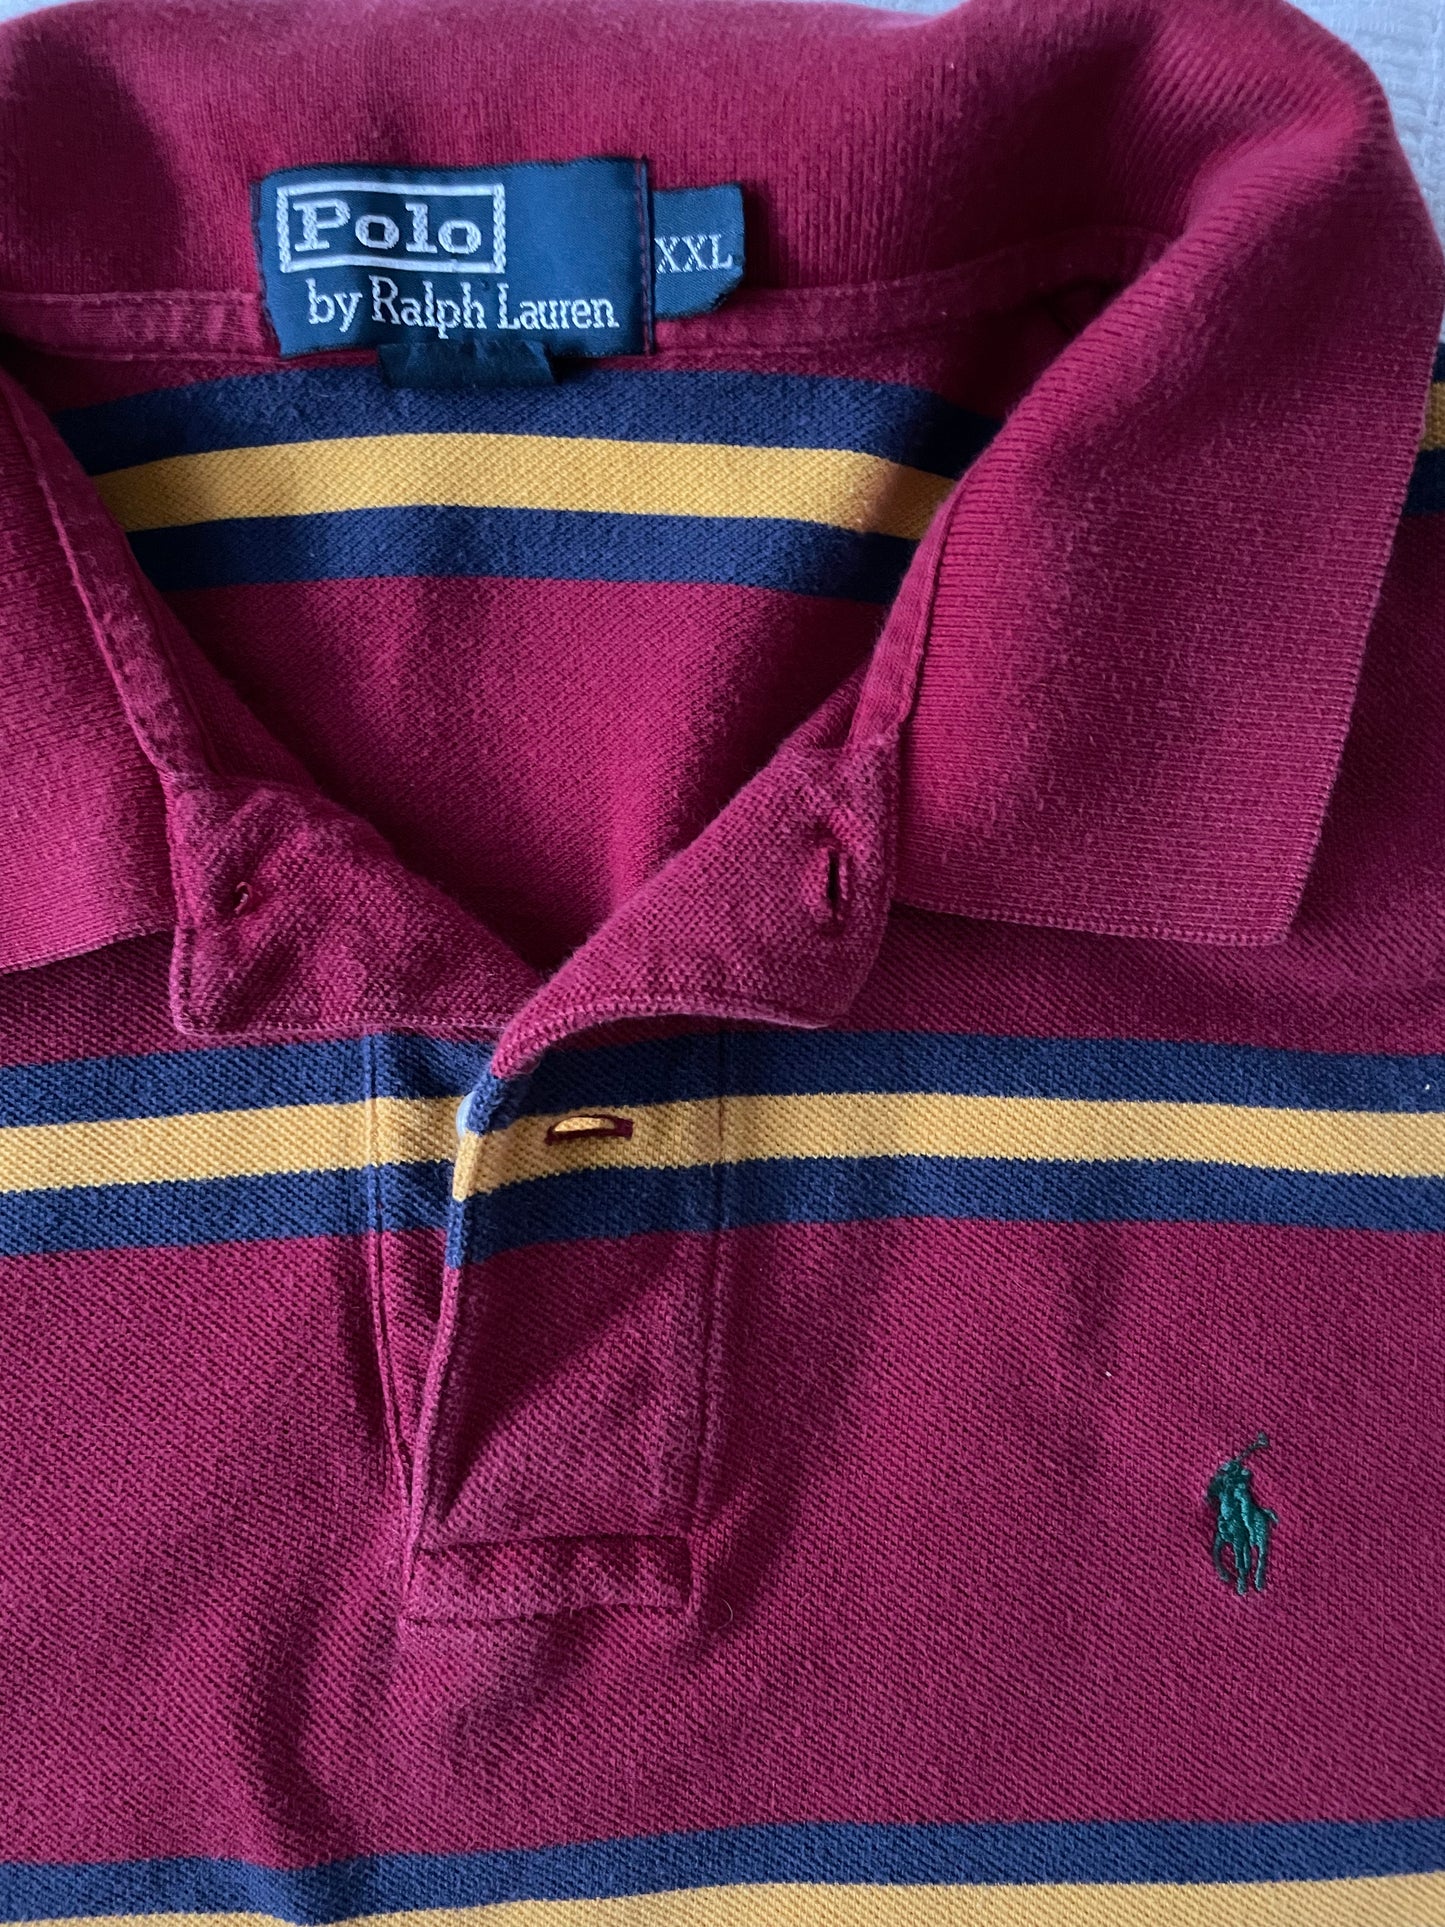 1990 Polo Rugby